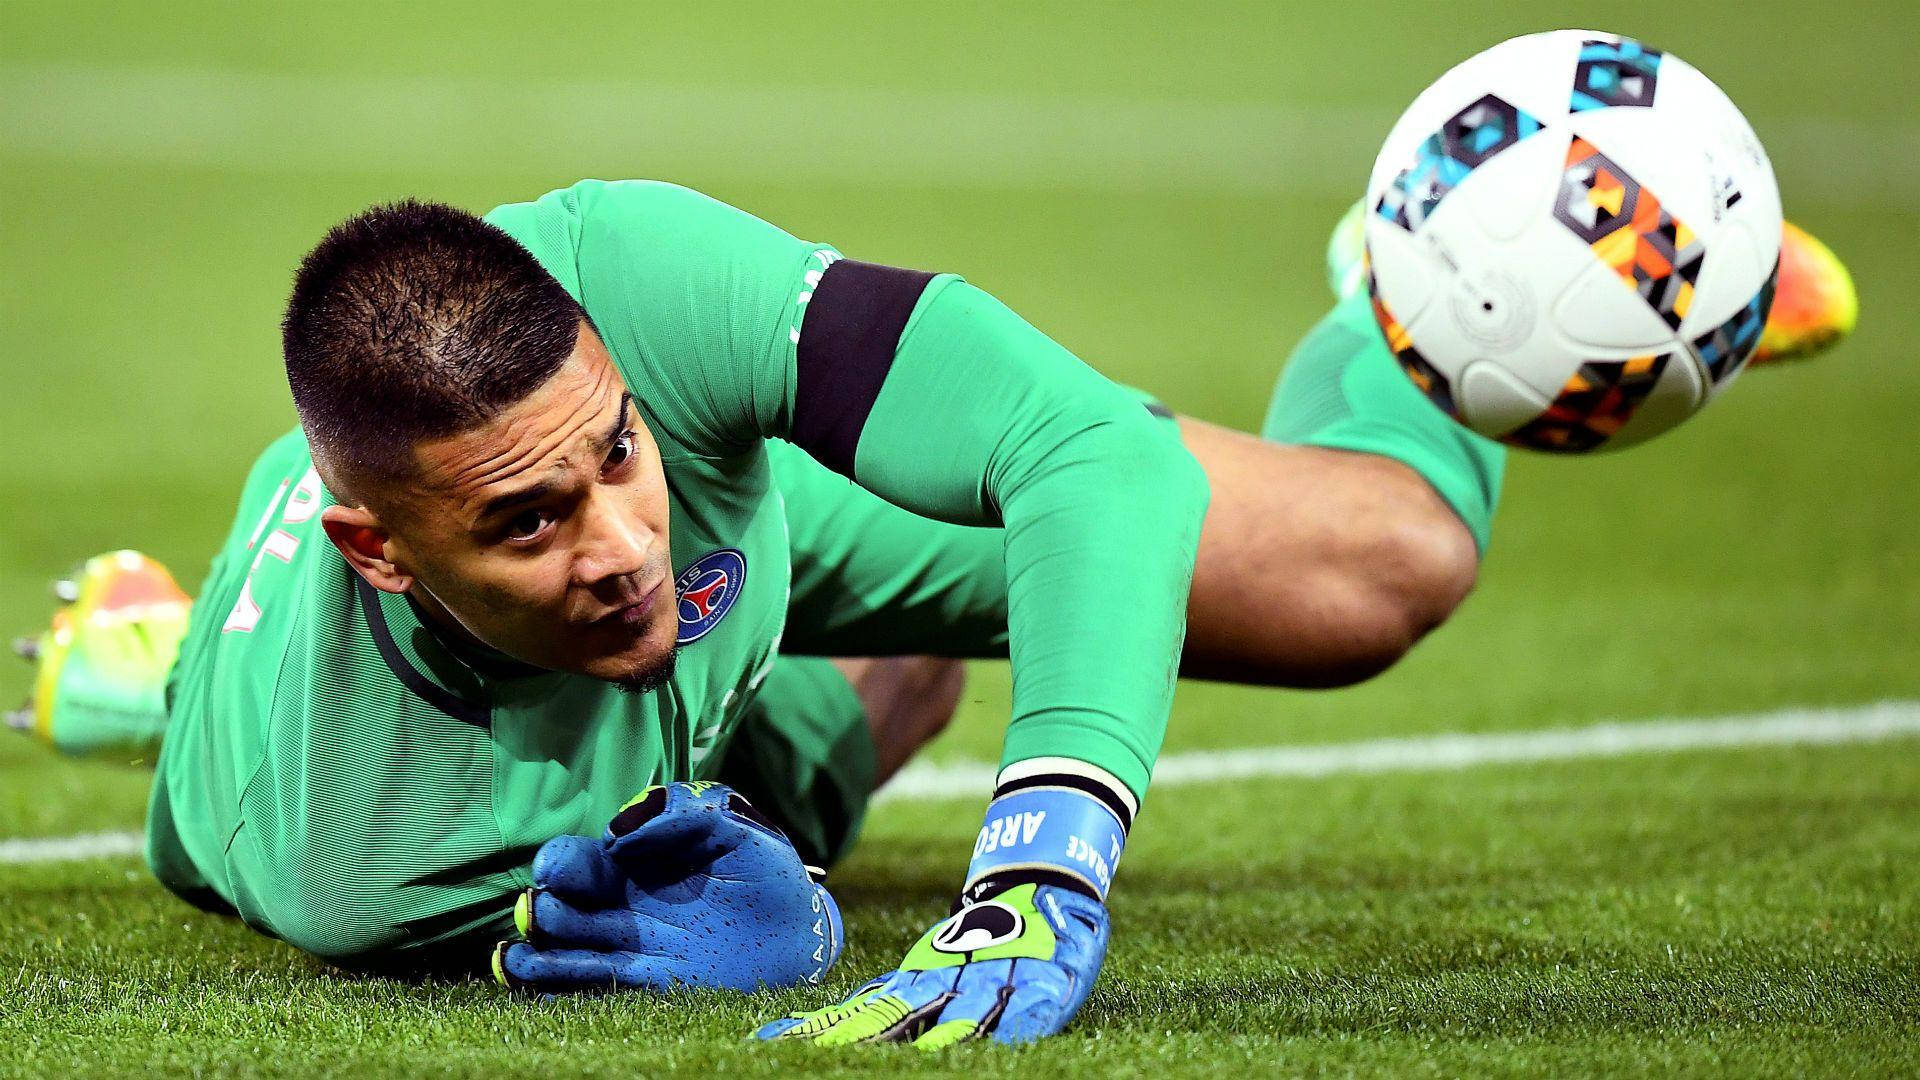 Alphonseareola Ligger På Planen. (assuming This Is A Suggestion For A Wallpaper Image) Wallpaper